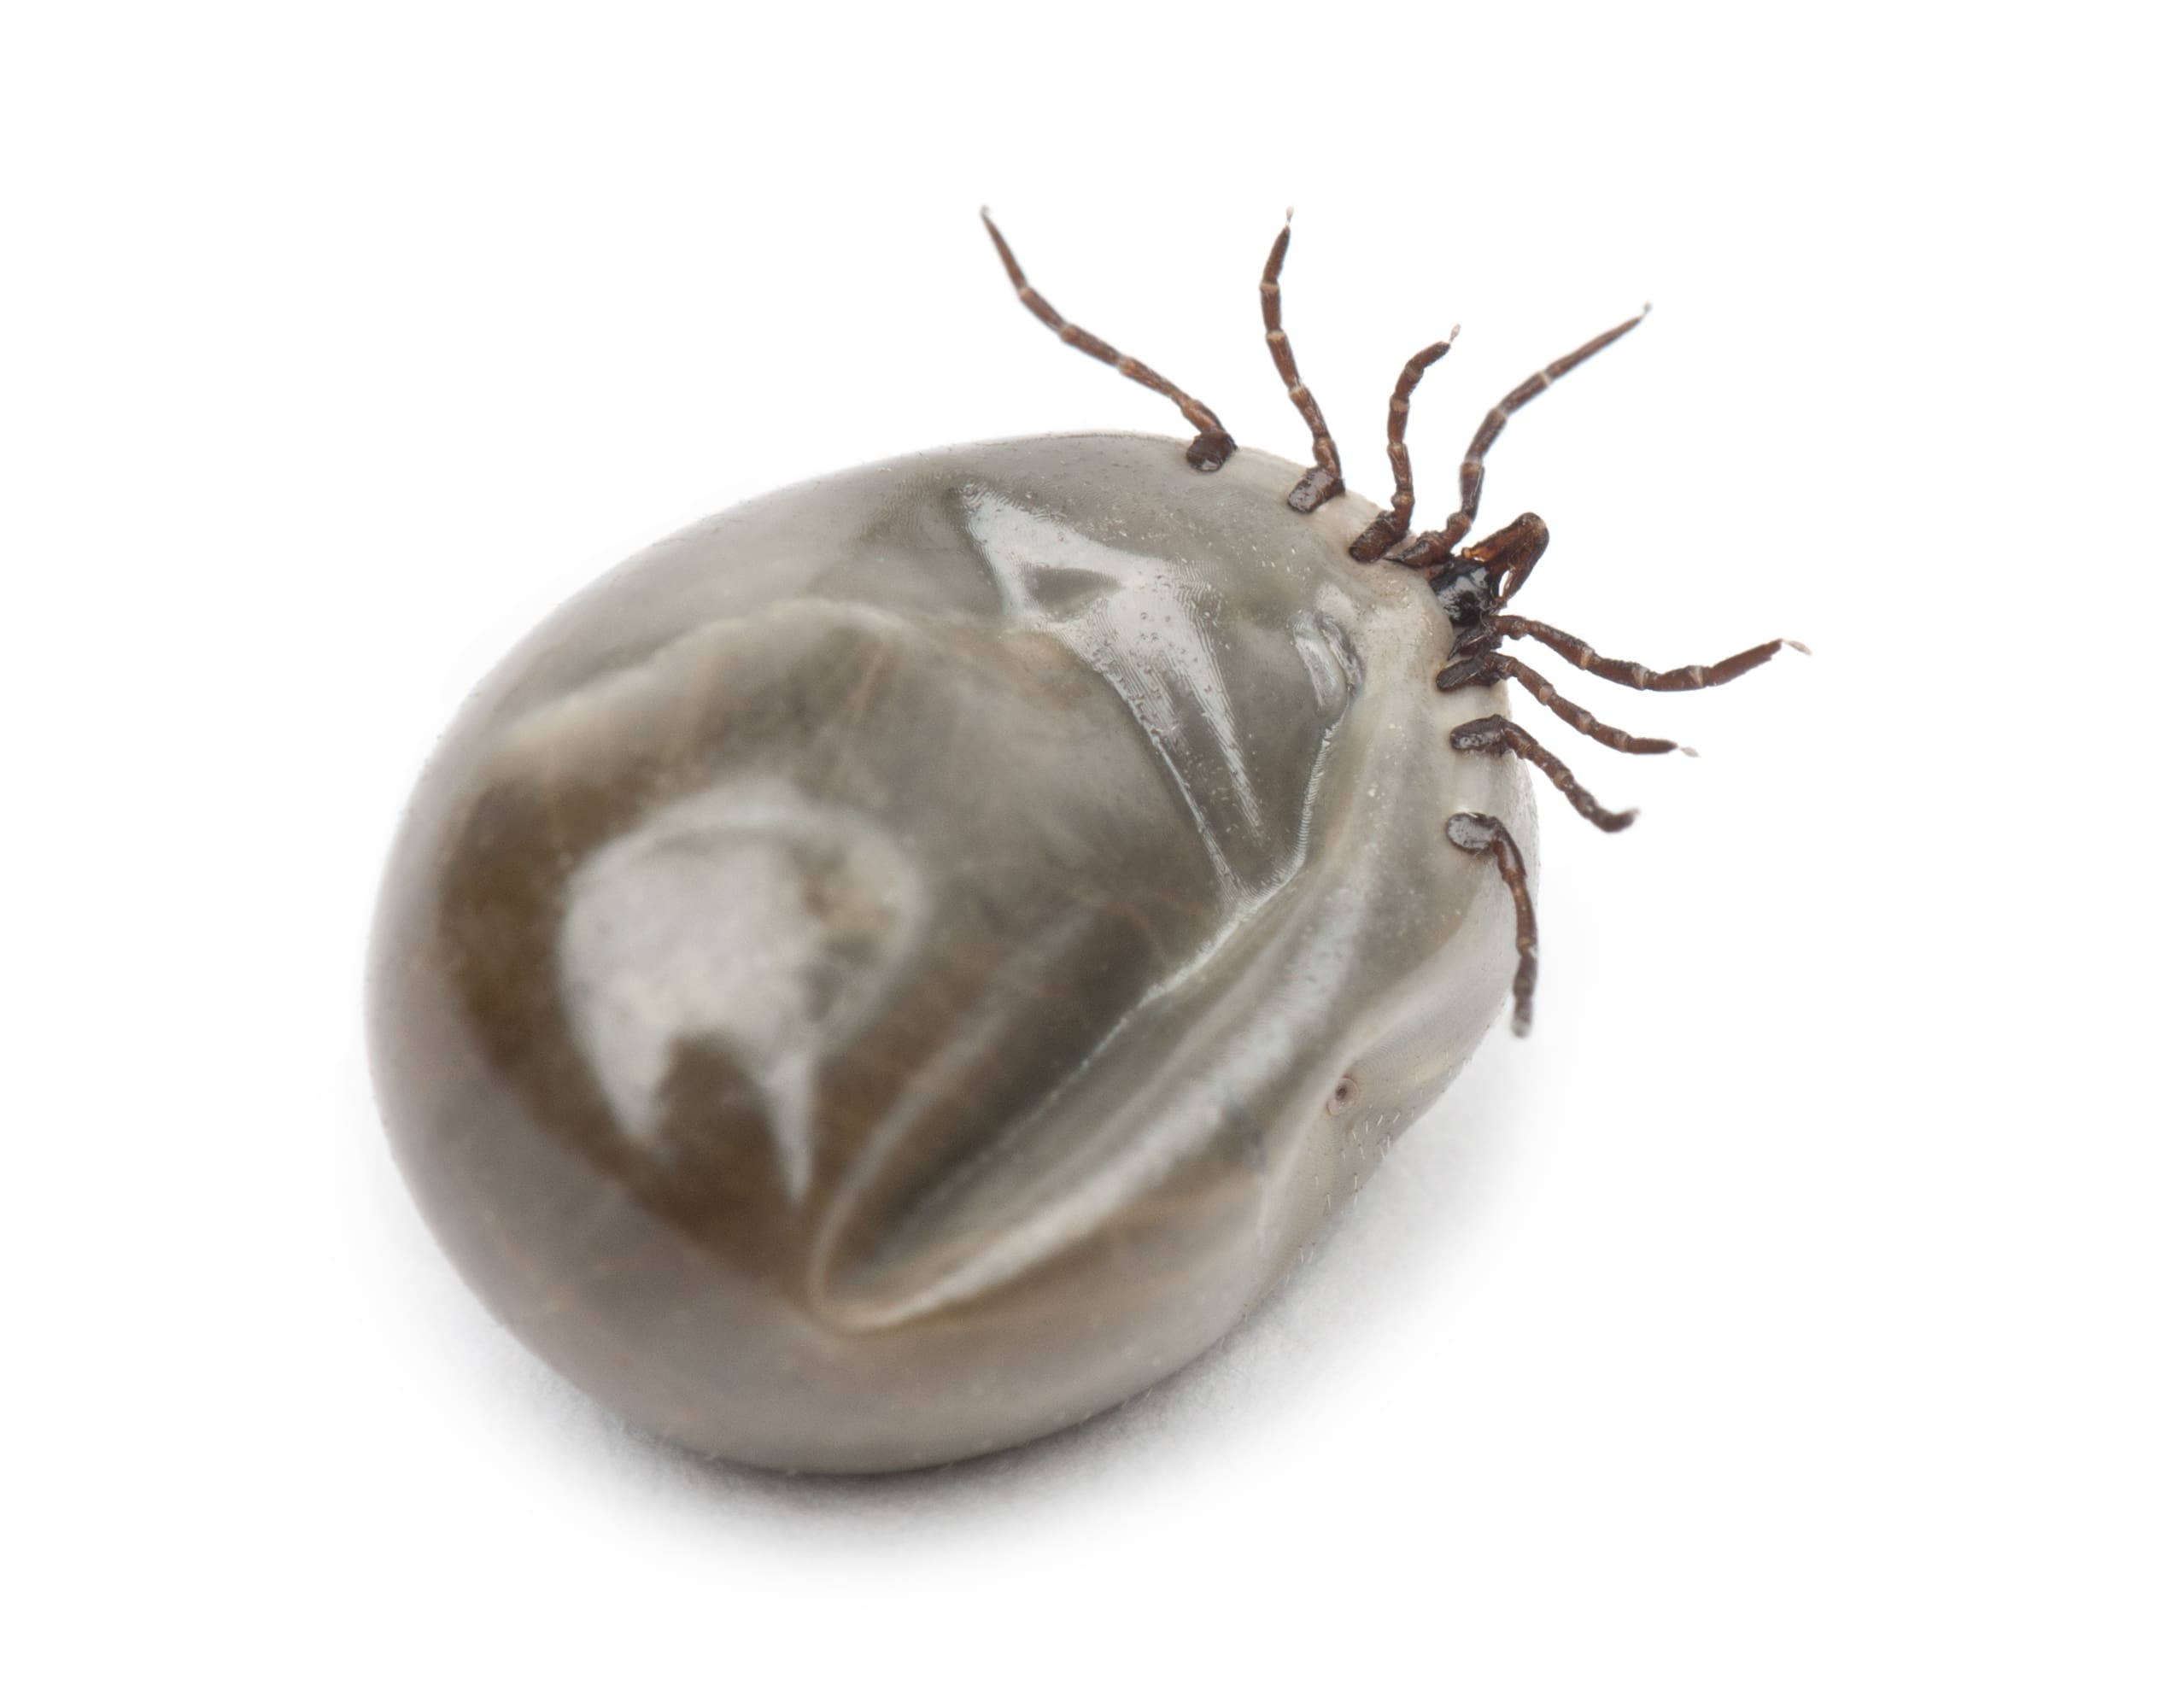 Engorged of blood Castor bean tick in Warwick, RI, Ixodes ricinus, a species of hard-bodied tick, against white background